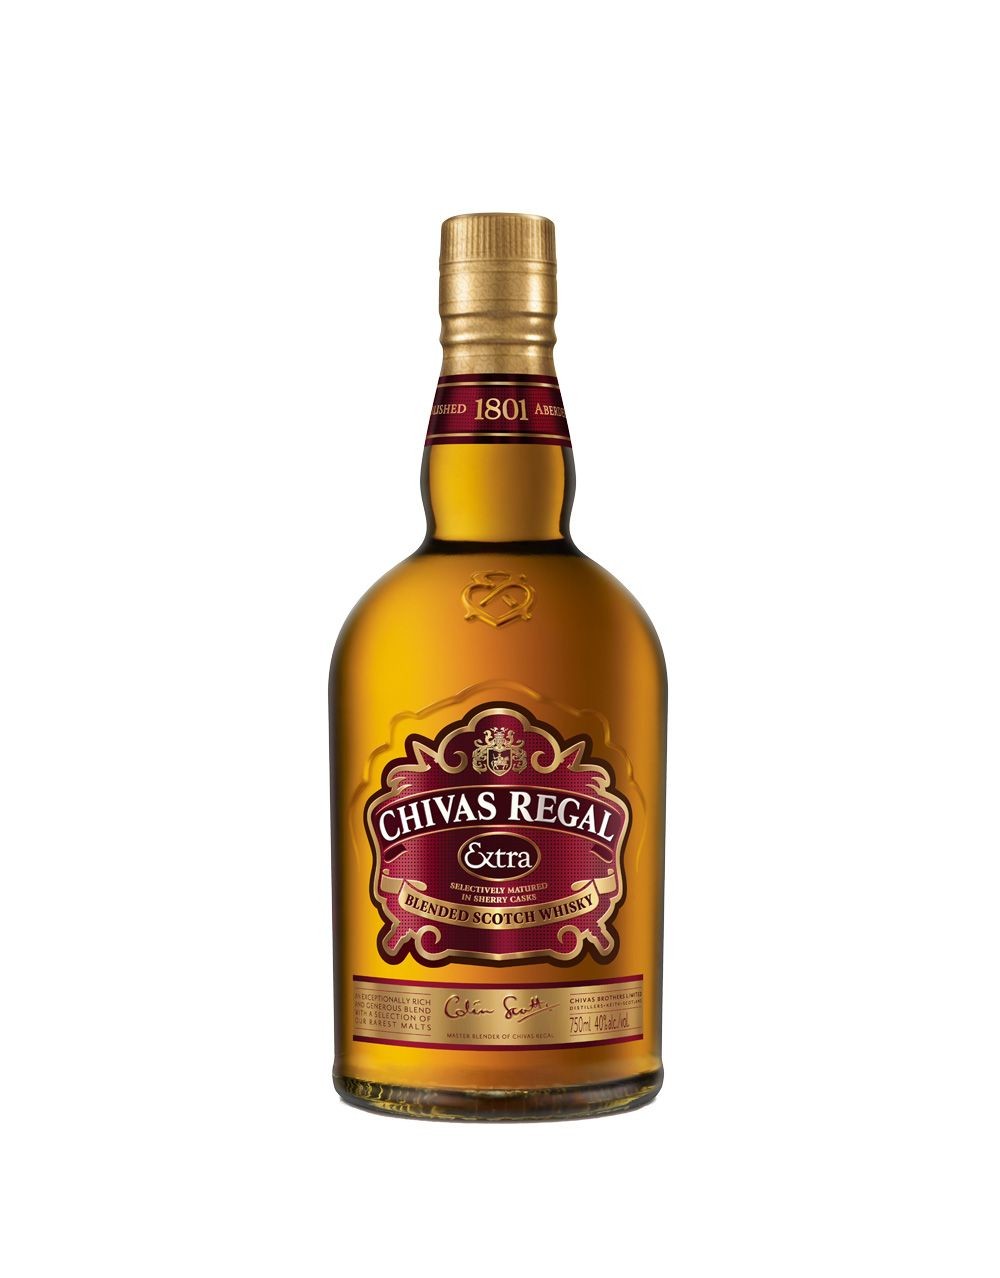 Chivas Regal Extra Blended Scotch Whisky, Buy Online or